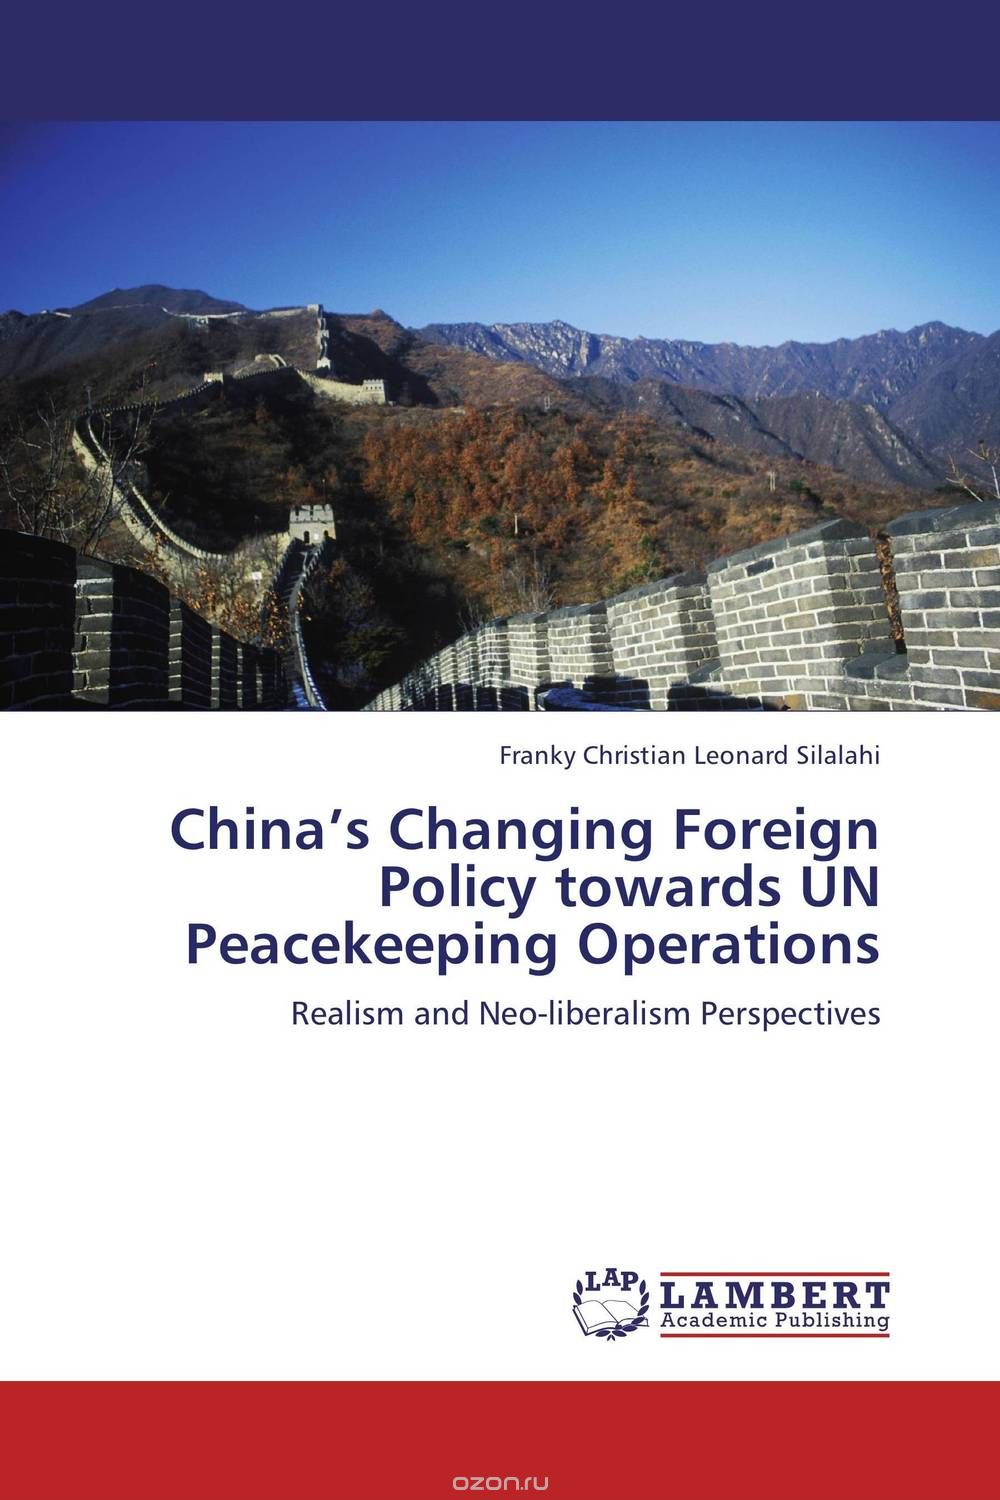 China’s Changing Foreign Policy towards UN Peacekeeping Operations